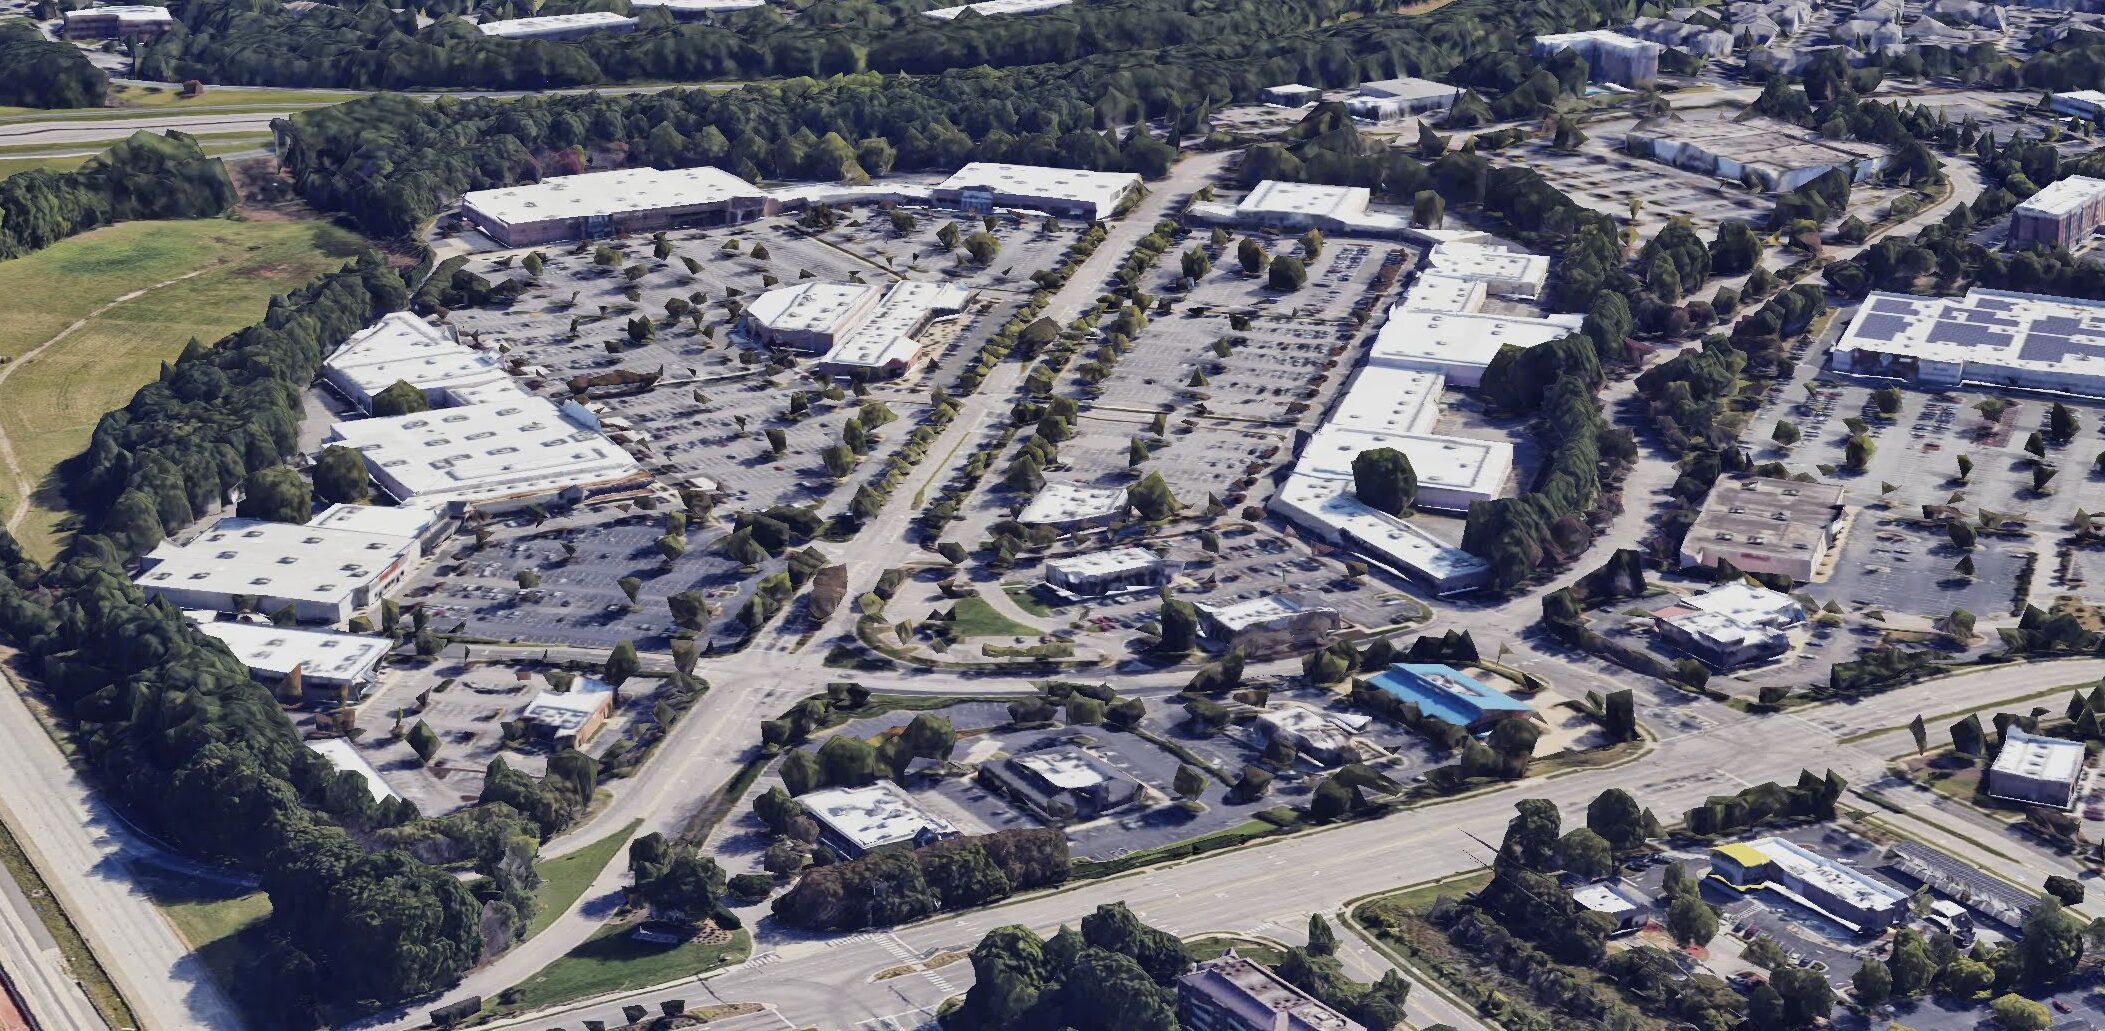 Crossroads Plaza aerial view.  Crossroads is one of the major shopping centers in Cary, NC.